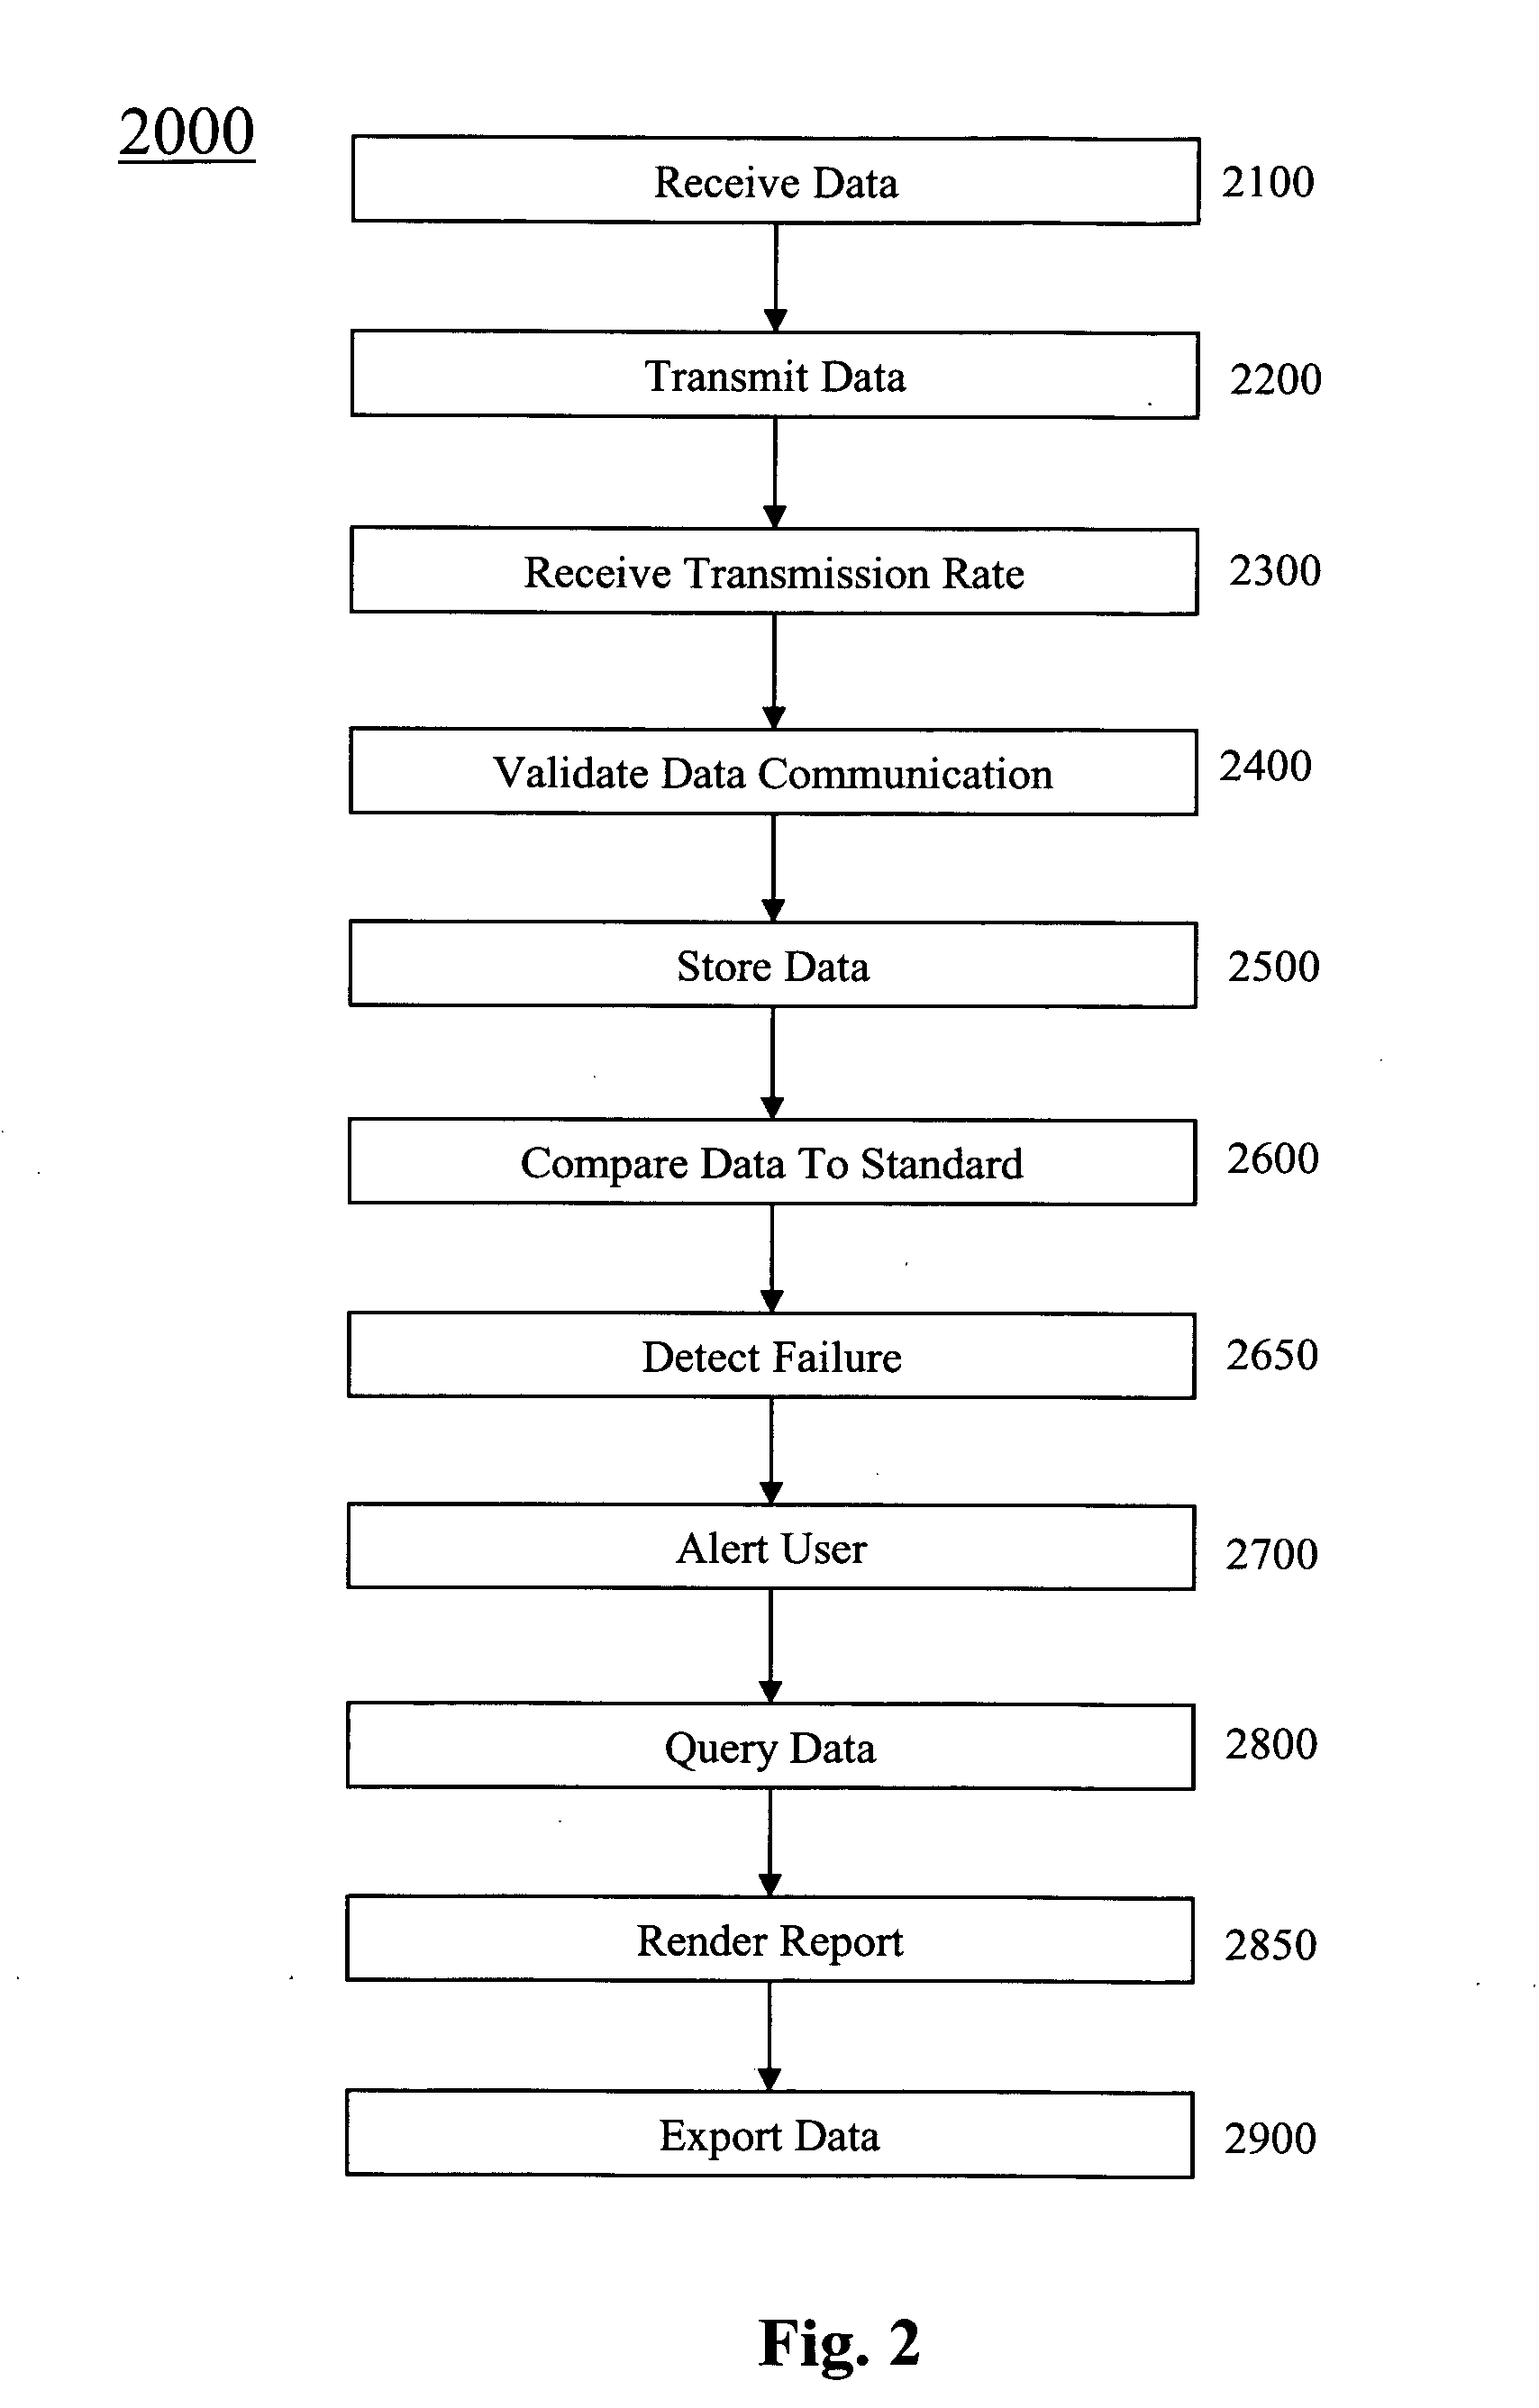 System and method for remotely obtaining and managing machine data